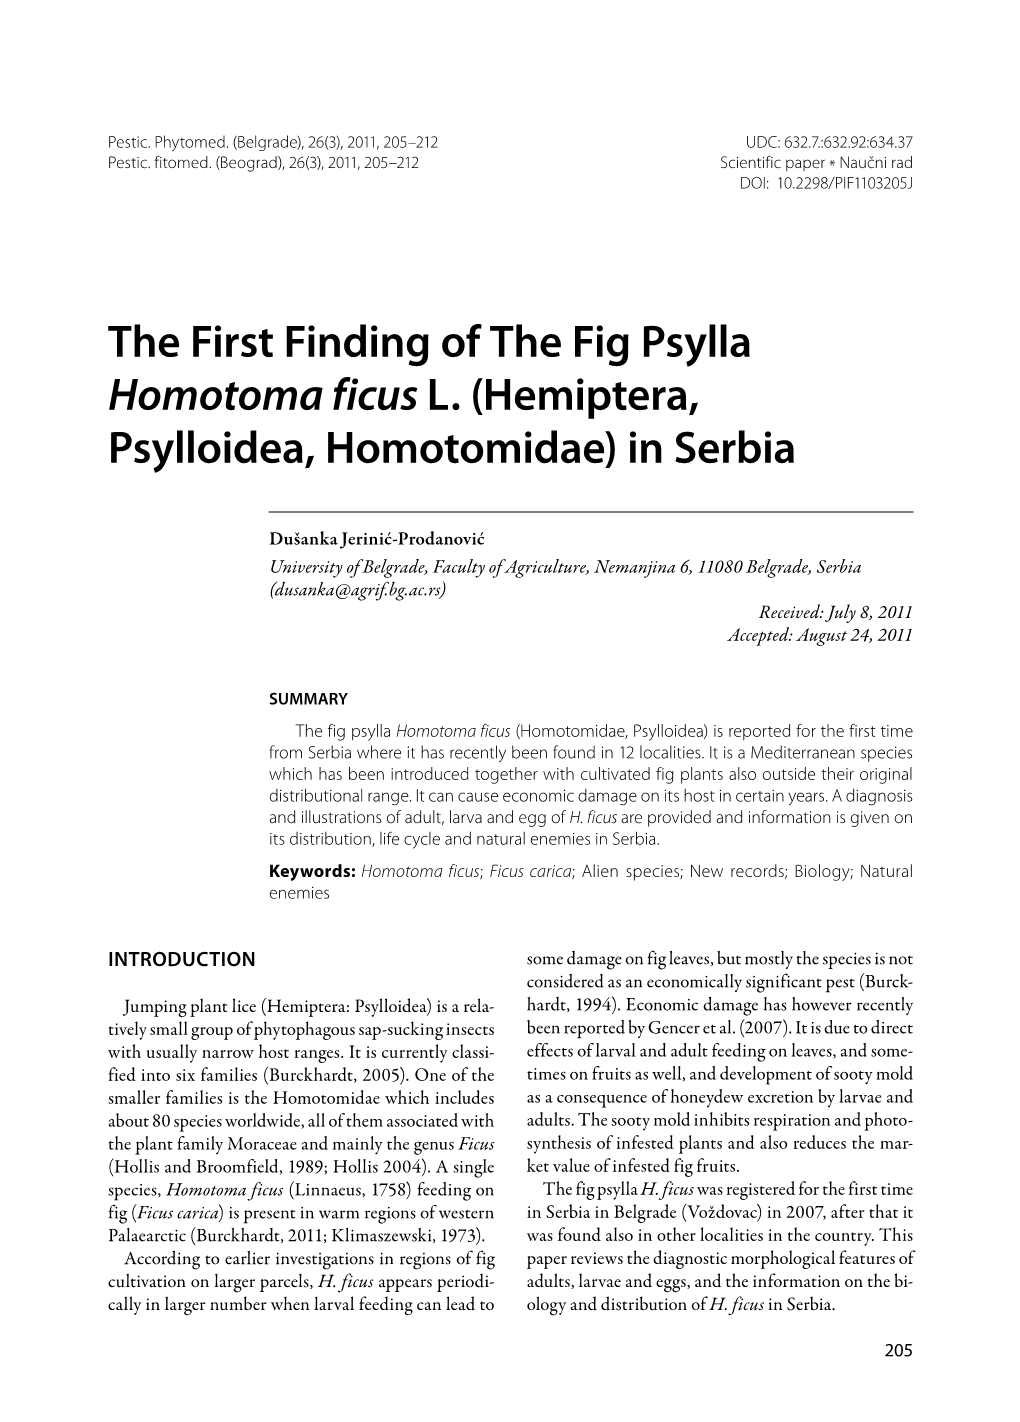 The First Finding of the Fig Psylla Homotoma Ficus L. (Hemiptera, Psylloidea, Homotomidae) in Serbia